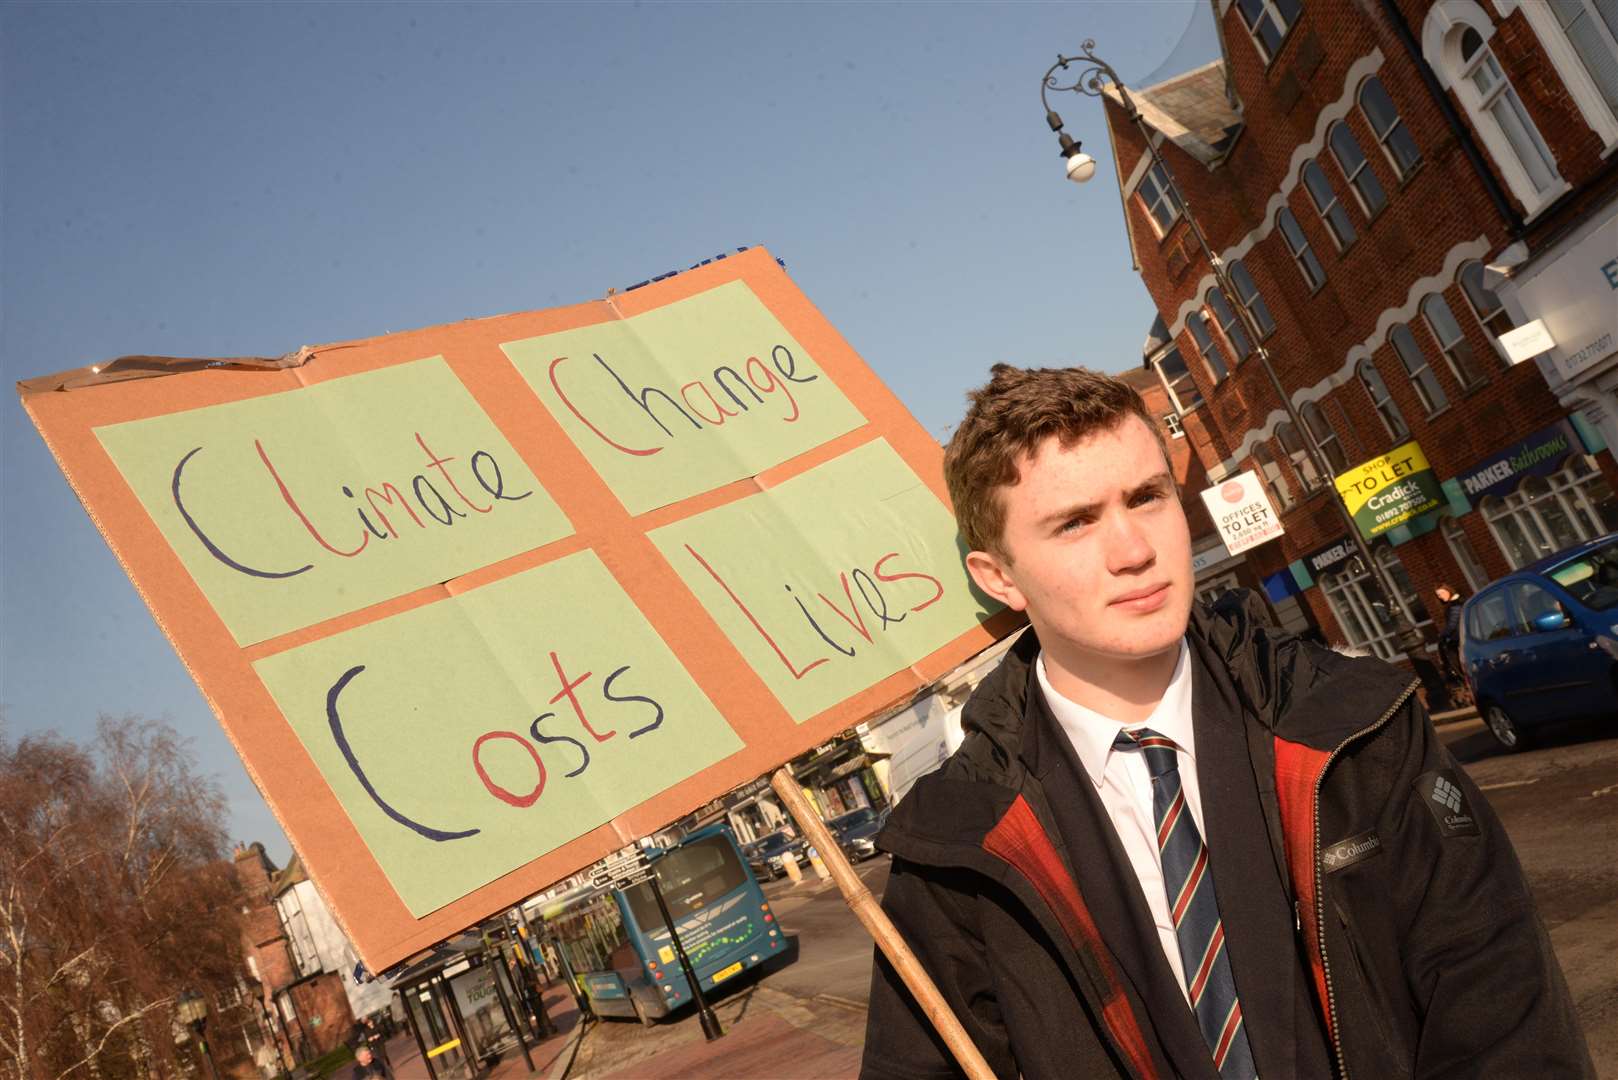 John Mulford from the Judd School protesting about insufficient climate change action in Tonbridge on Friday. Picture: Chris Davey